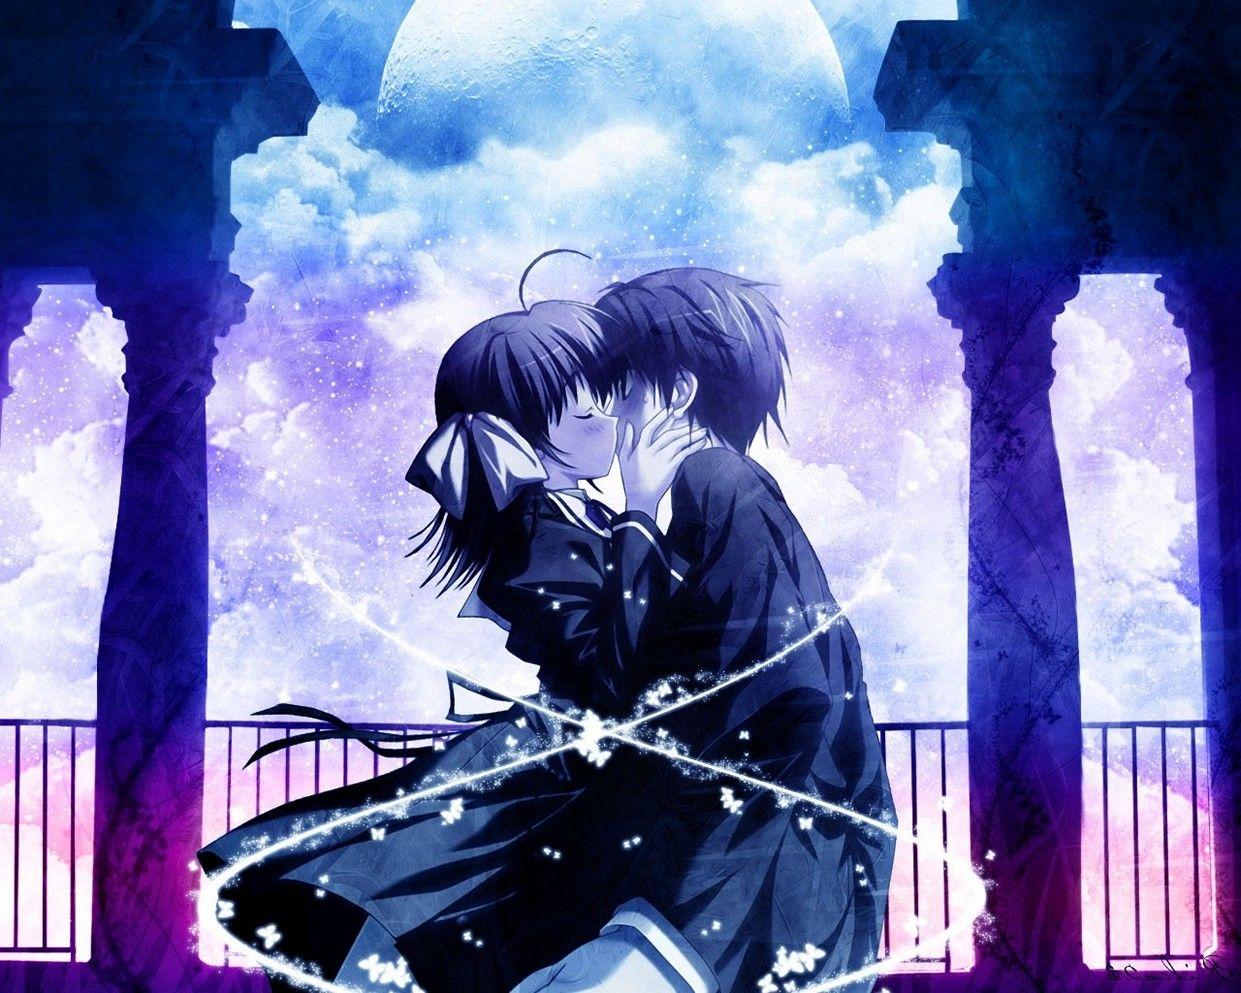 Kiss Anime Wallpapers APK for Android Download